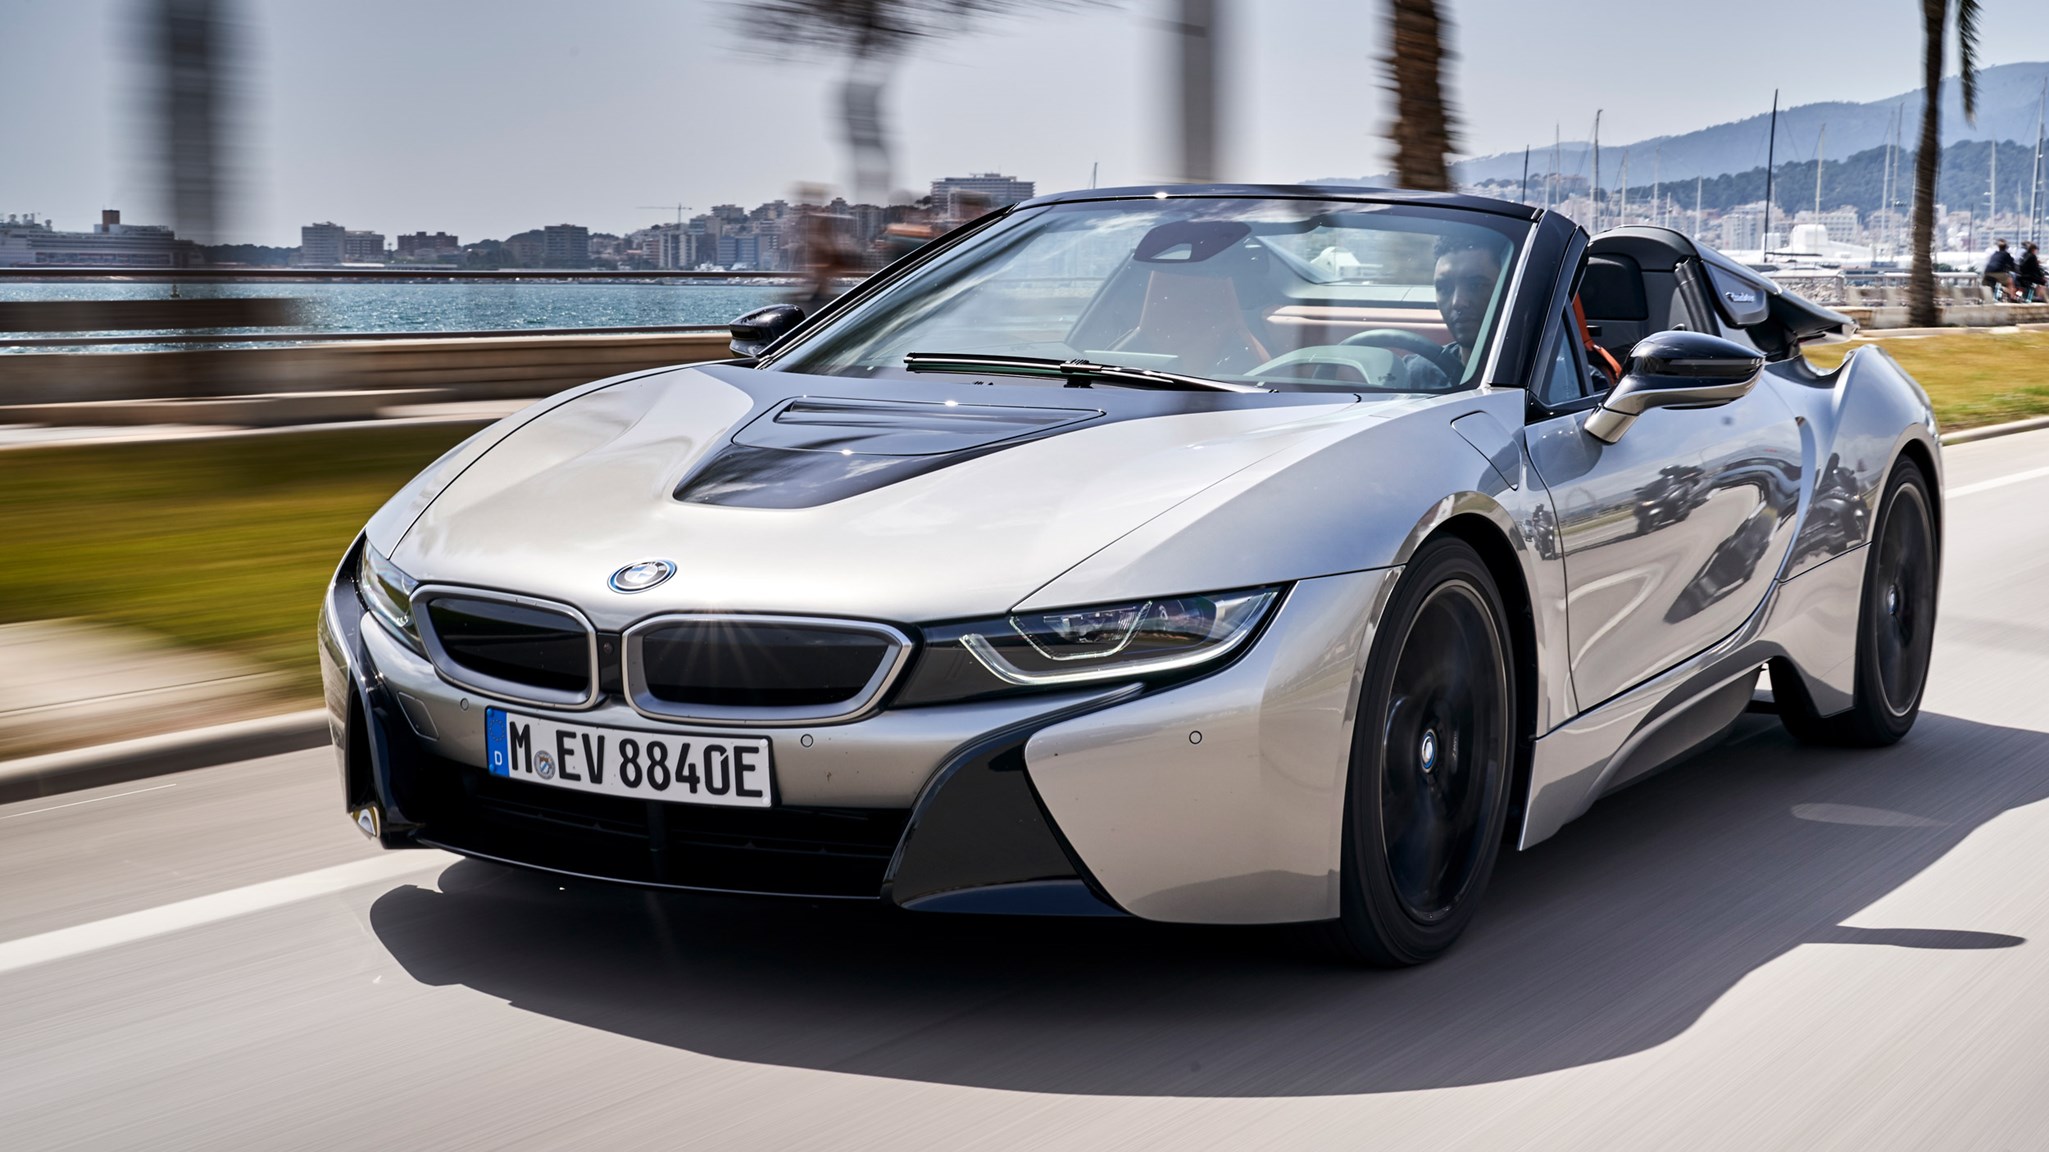 BMW i8 Roadster review: the hybrid supercar, refined | CAR ...